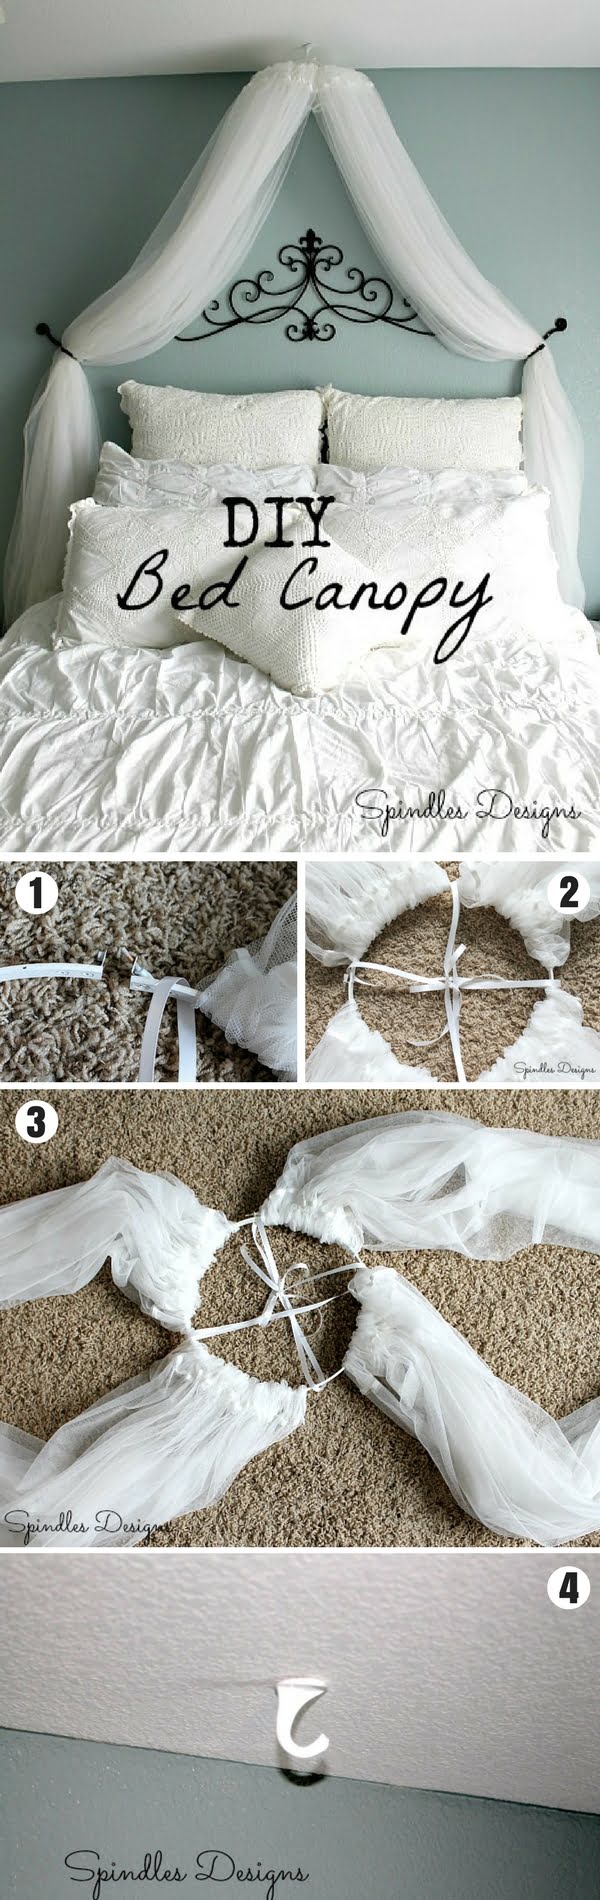 Check out how to make an easy DIY bed canopy 